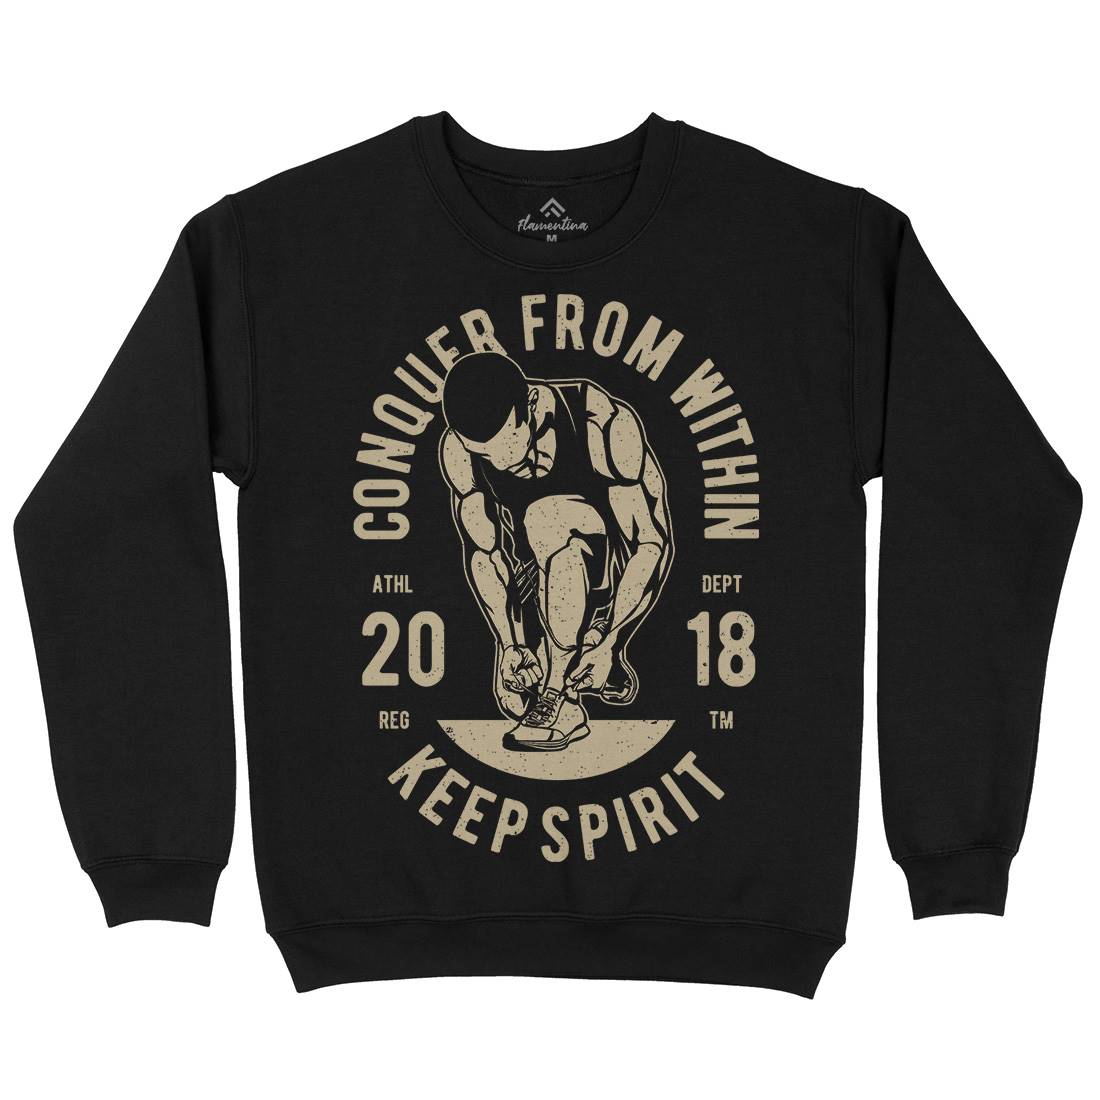 Conquer From Within Mens Crew Neck Sweatshirt Sport A638